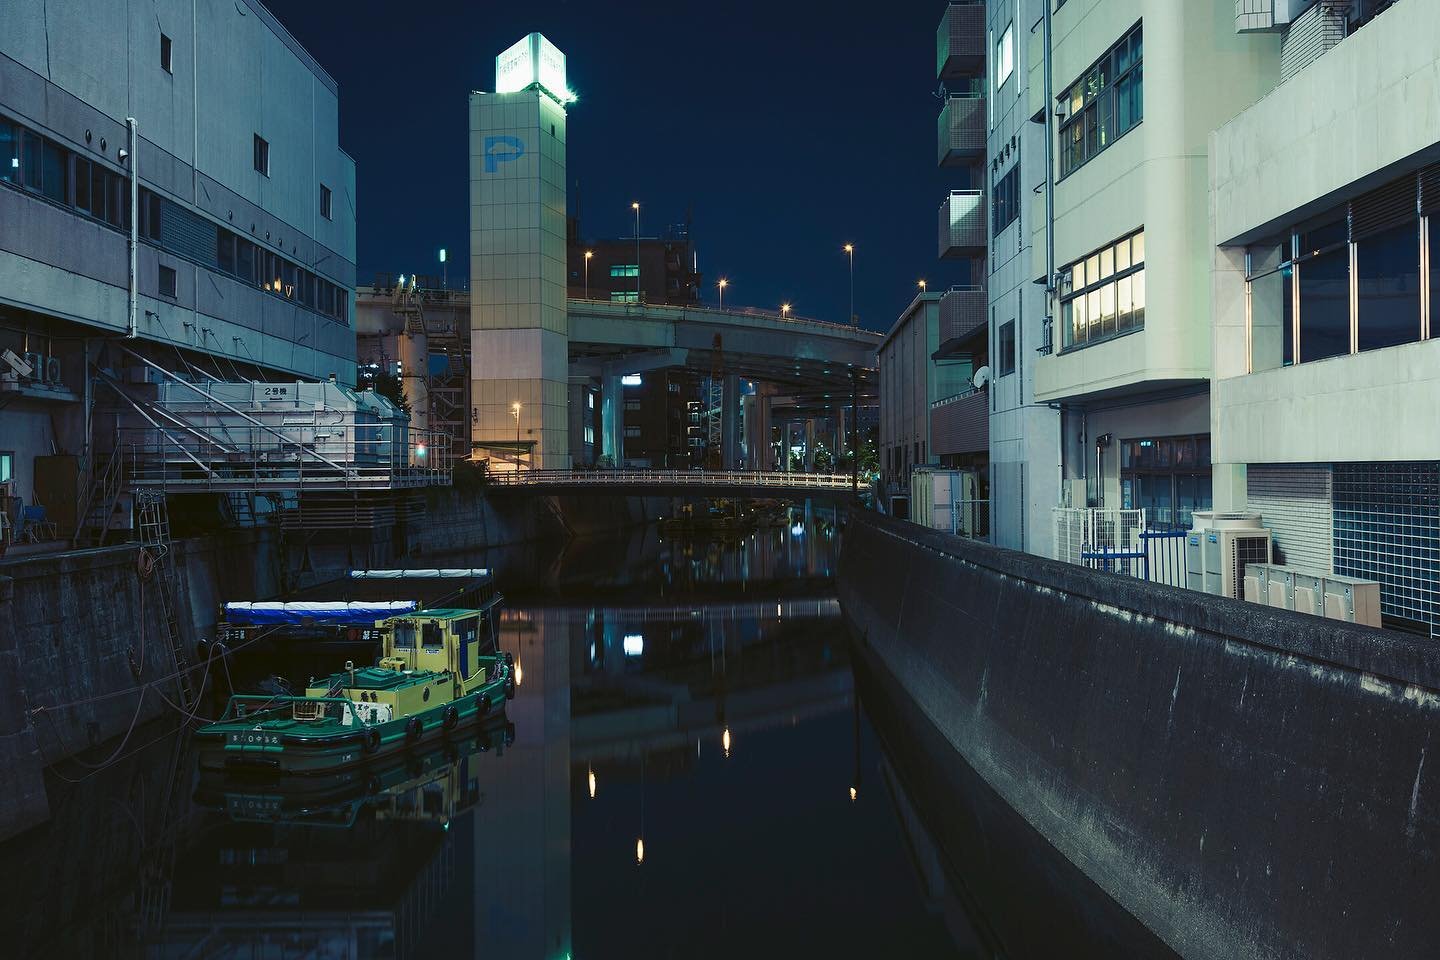 The Kanda flows 24.6 kilometres through some of the densest parts of central Tokyo. The river is frequently flagged on both sides by apartment&nbsp;and office&nbsp;buildings and canopied by the elevated expressway as a result of the city&rsquo;s rapi